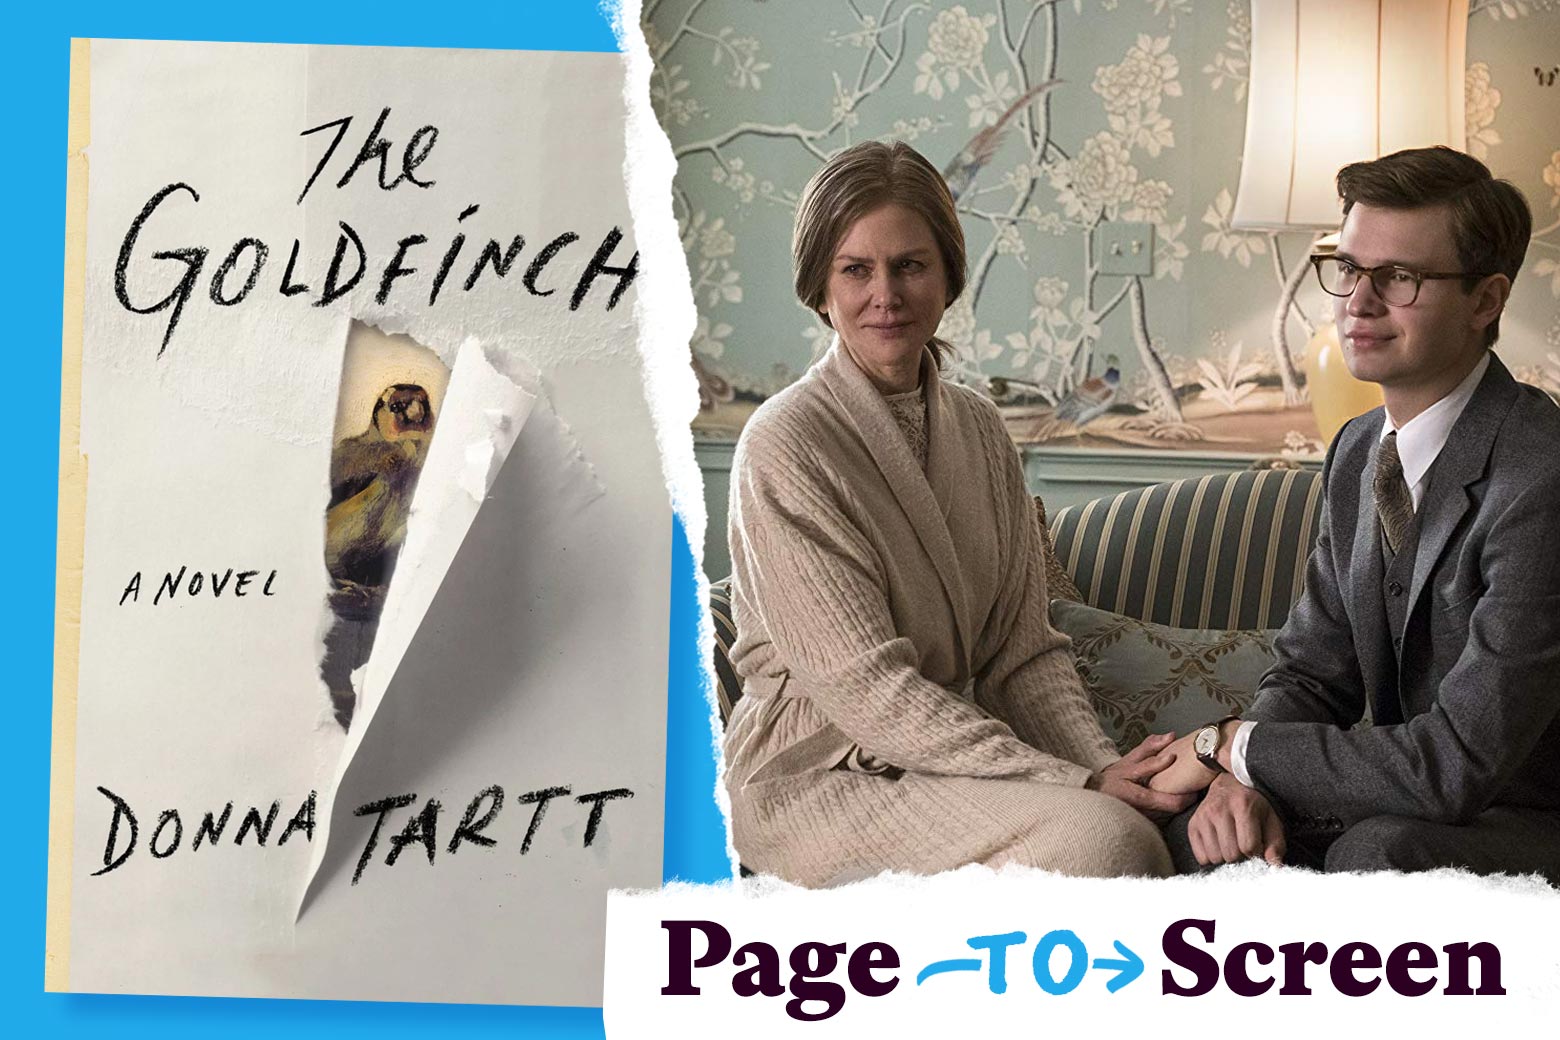 The cover of The Goldfinch book and a still image from the movie featuring Nicole Kidman and Ansel Elgort.